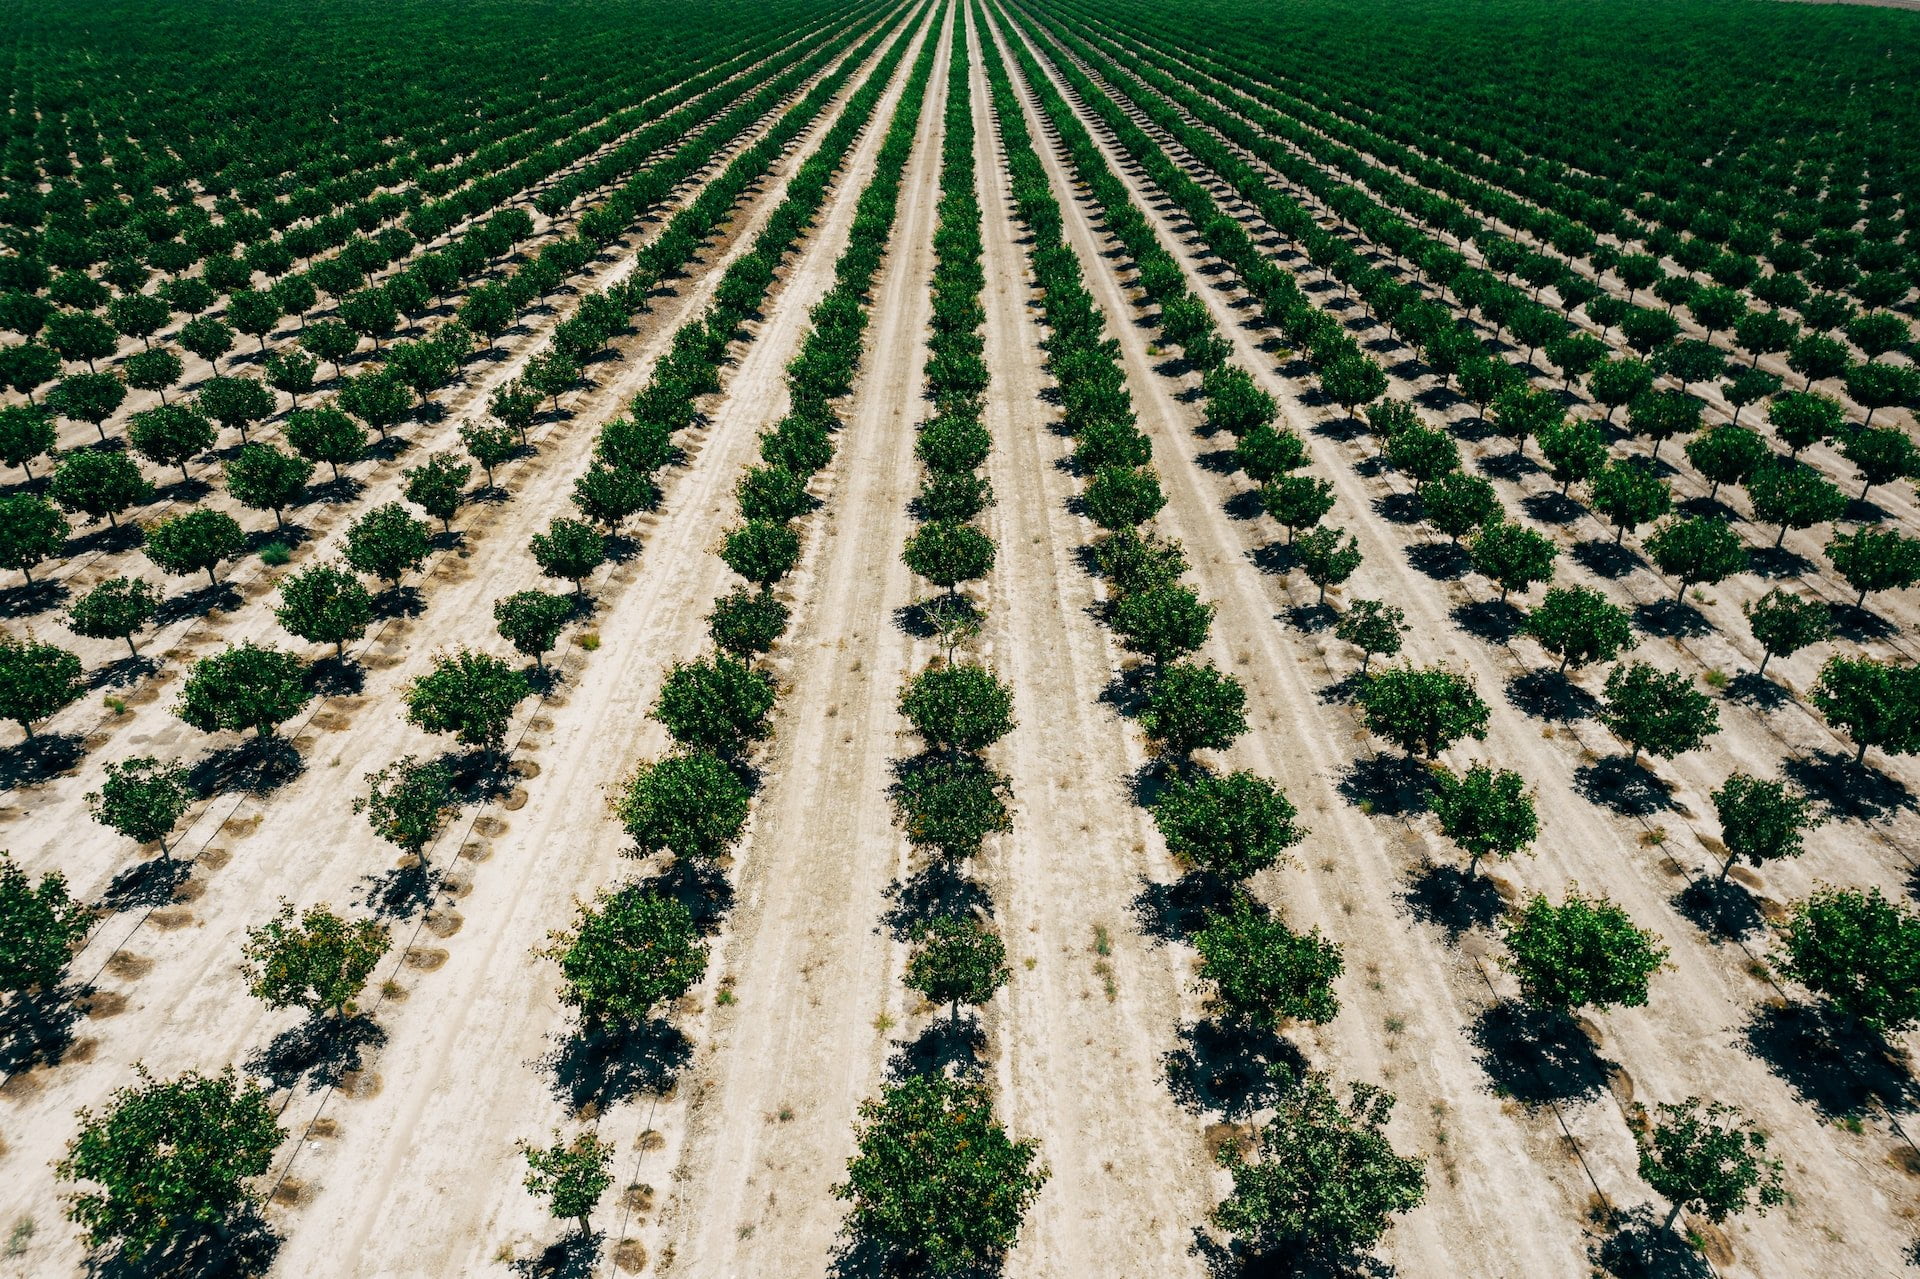 Depicts trees lined up in rows on a citrus farm in California. Used as a cover image for an article providing an overview of FarmTogether, a farmland investing platform.